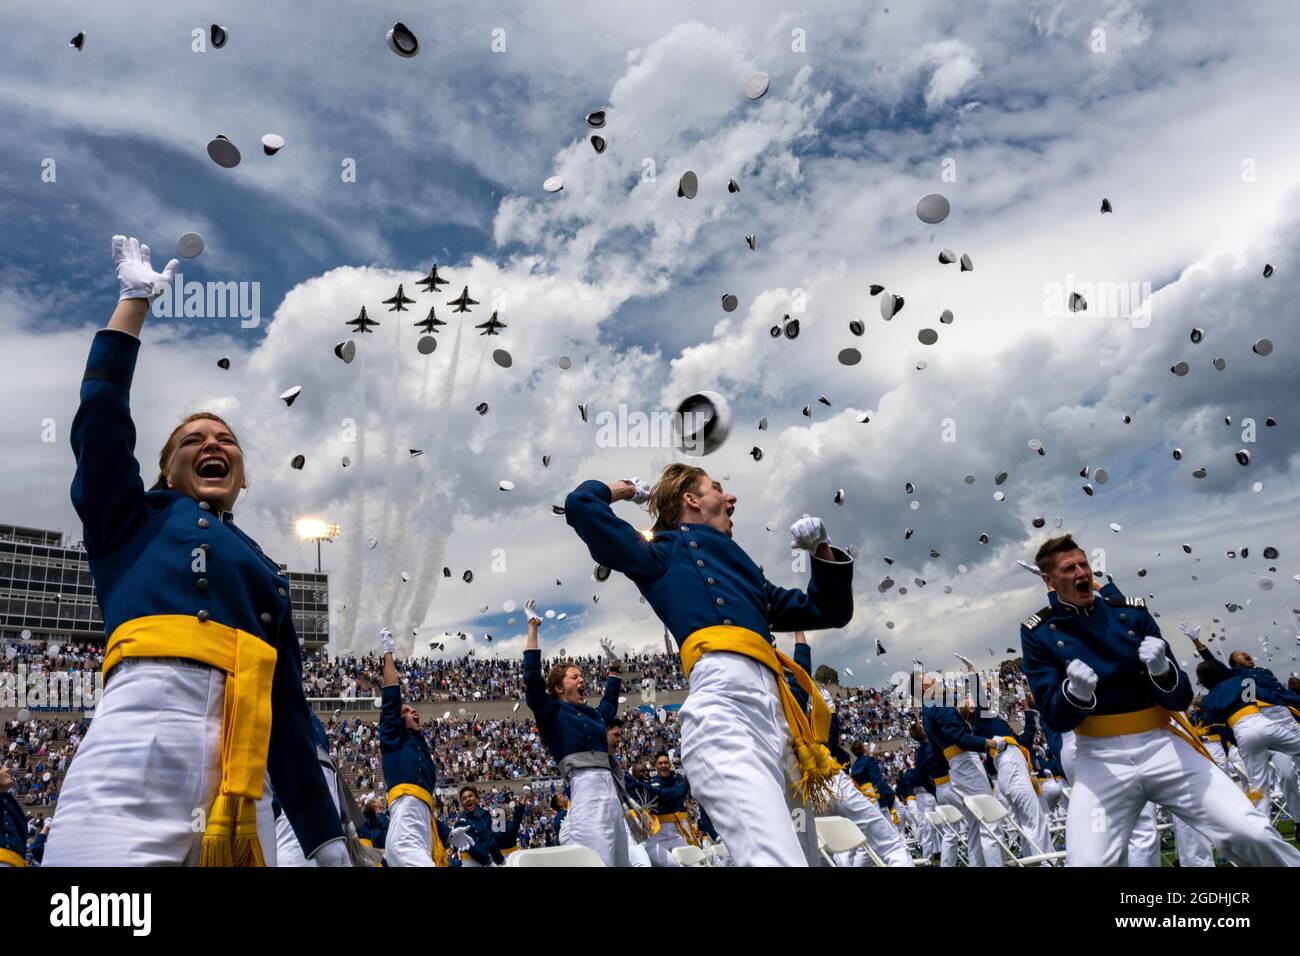 The U.S. Air Force Air Demonstration Squadron 'Thunderbirds' perform a fly-over at the Air Force Academy graduation in Colorado Springs, Colorado, May 26, 2021. Shortly after the event, the Thunderbirds performed an aerial demonstration for the crowd and the newly promoted second lieutenants. (U.S. Air Force Photo/SSgt Laurel M. Richards) Stock Photo